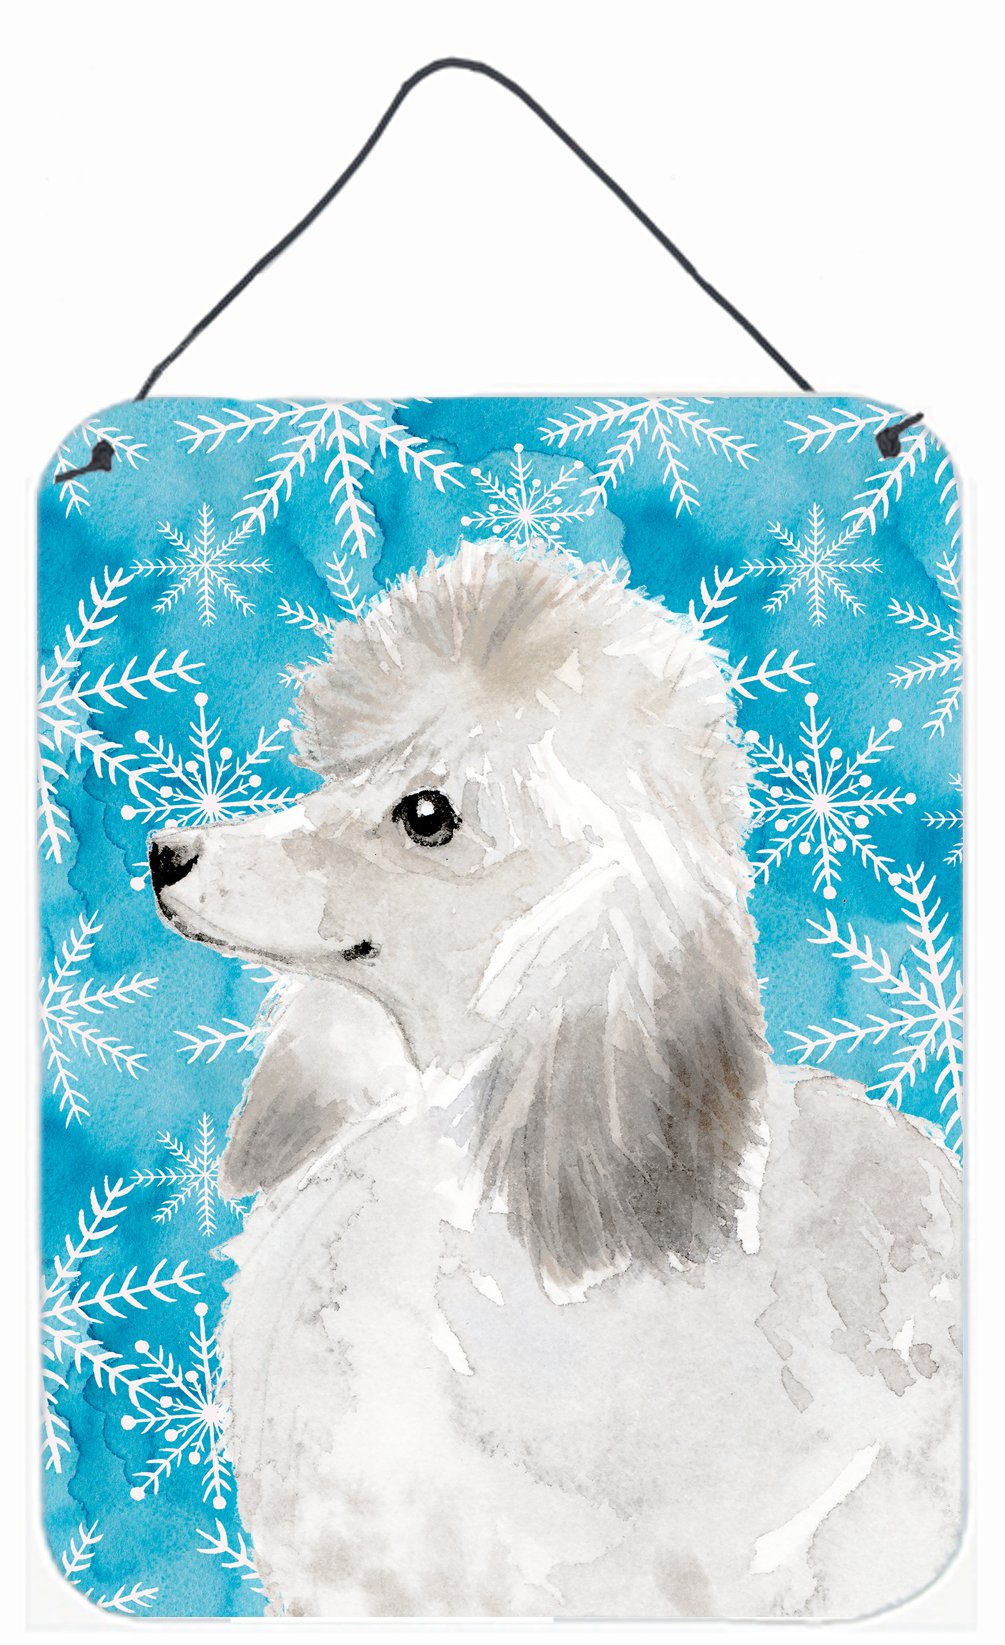 White Standard Poodle Winter Wall or Door Hanging Prints BB9456DS1216 by Caroline's Treasures